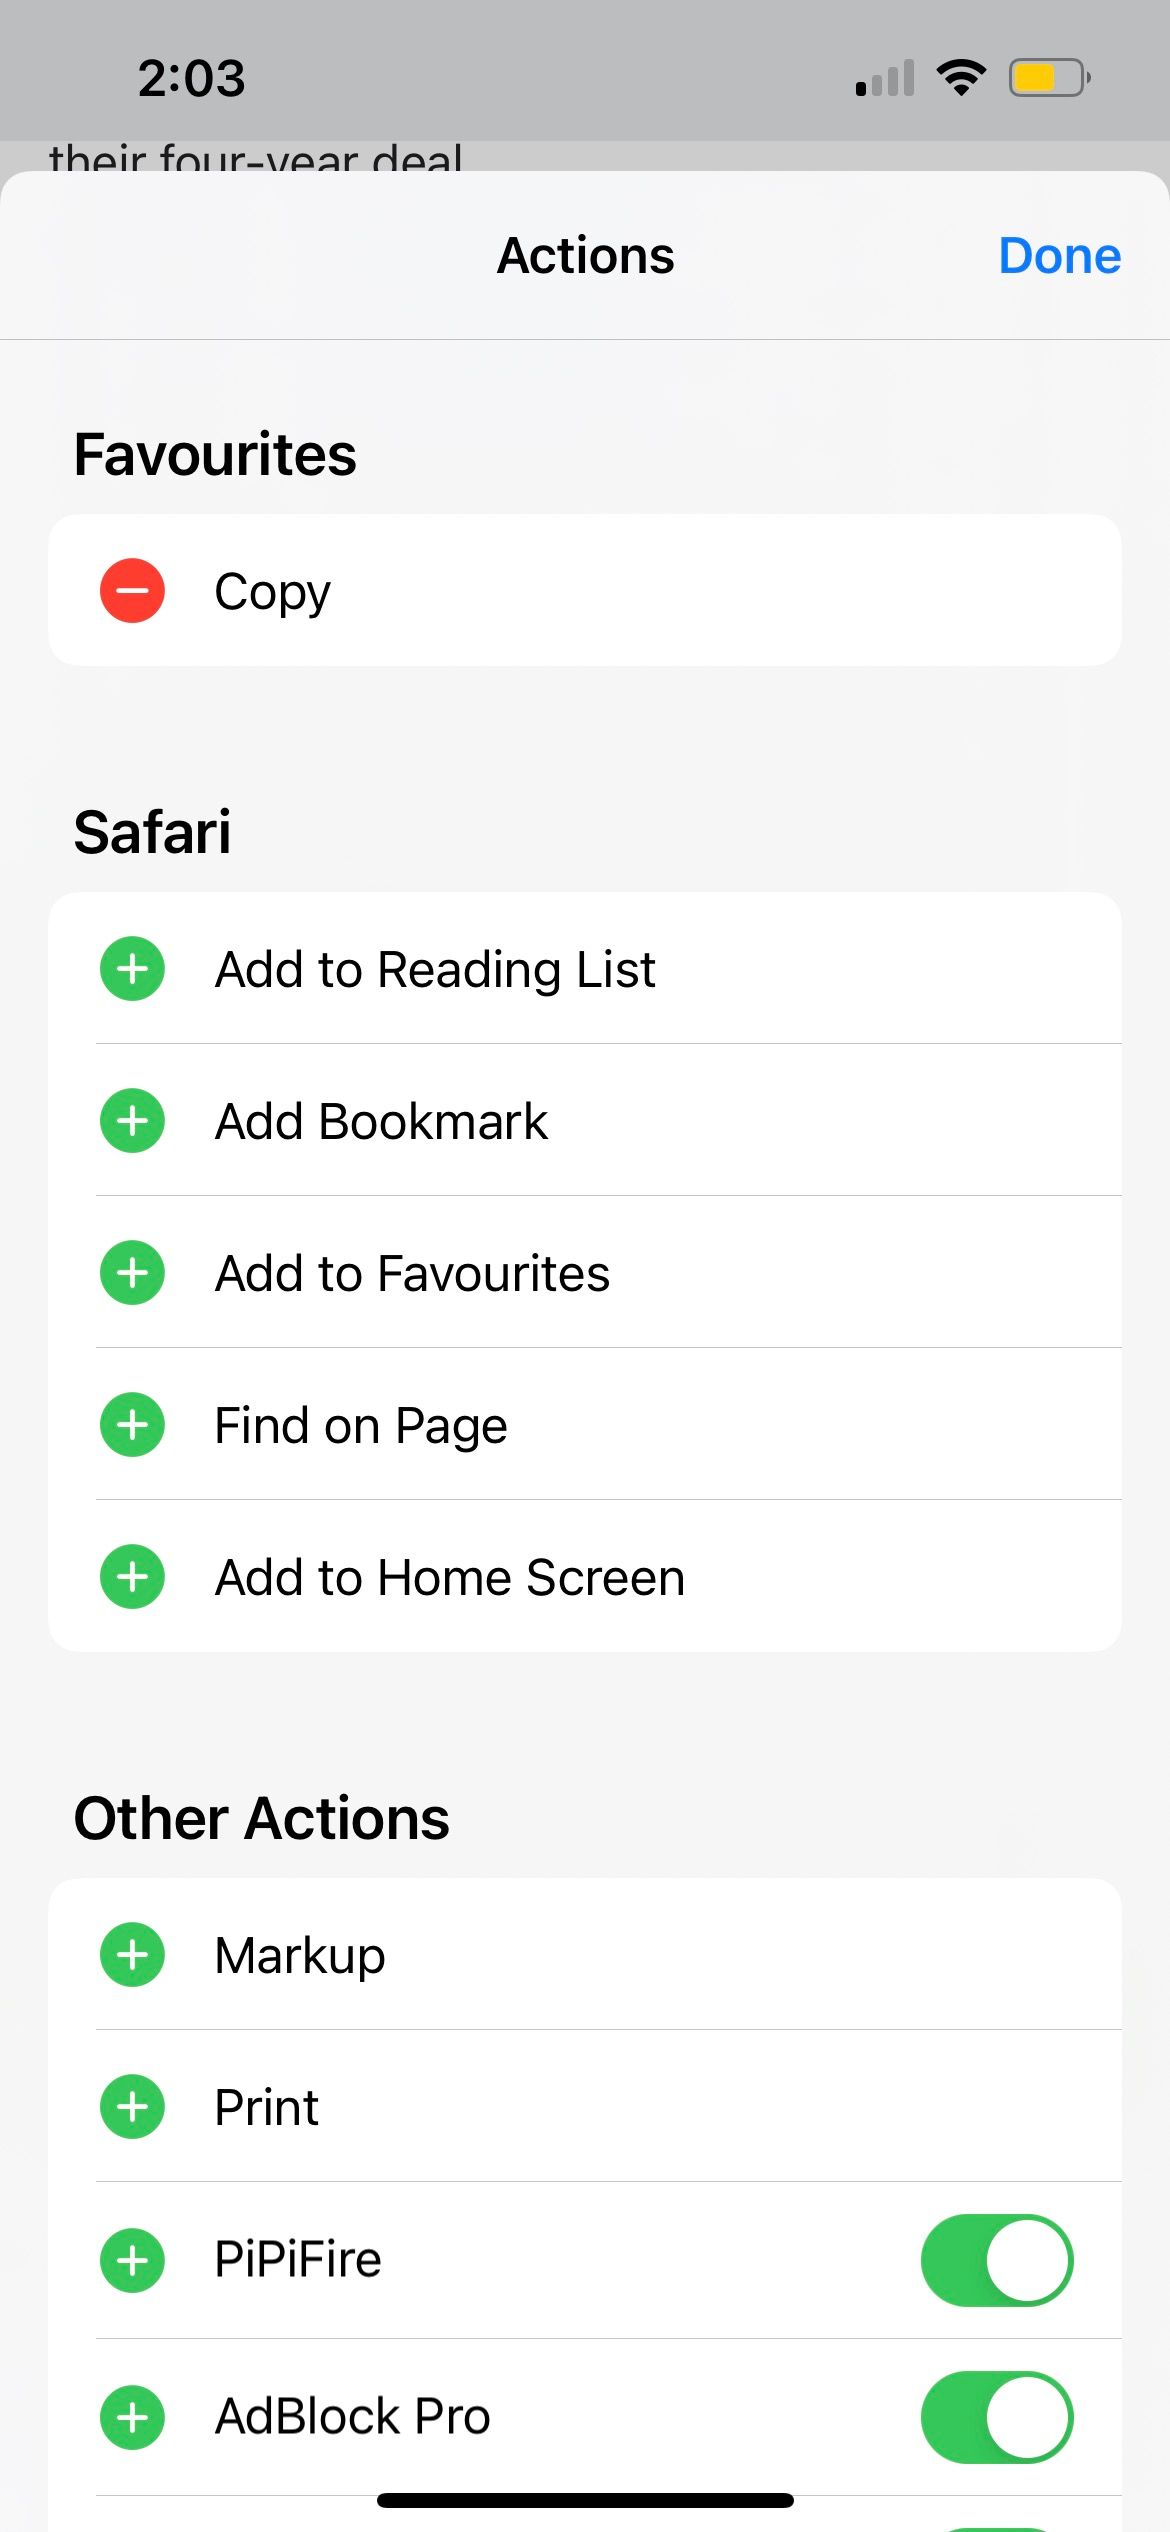 editing share actions in iphone share sheet